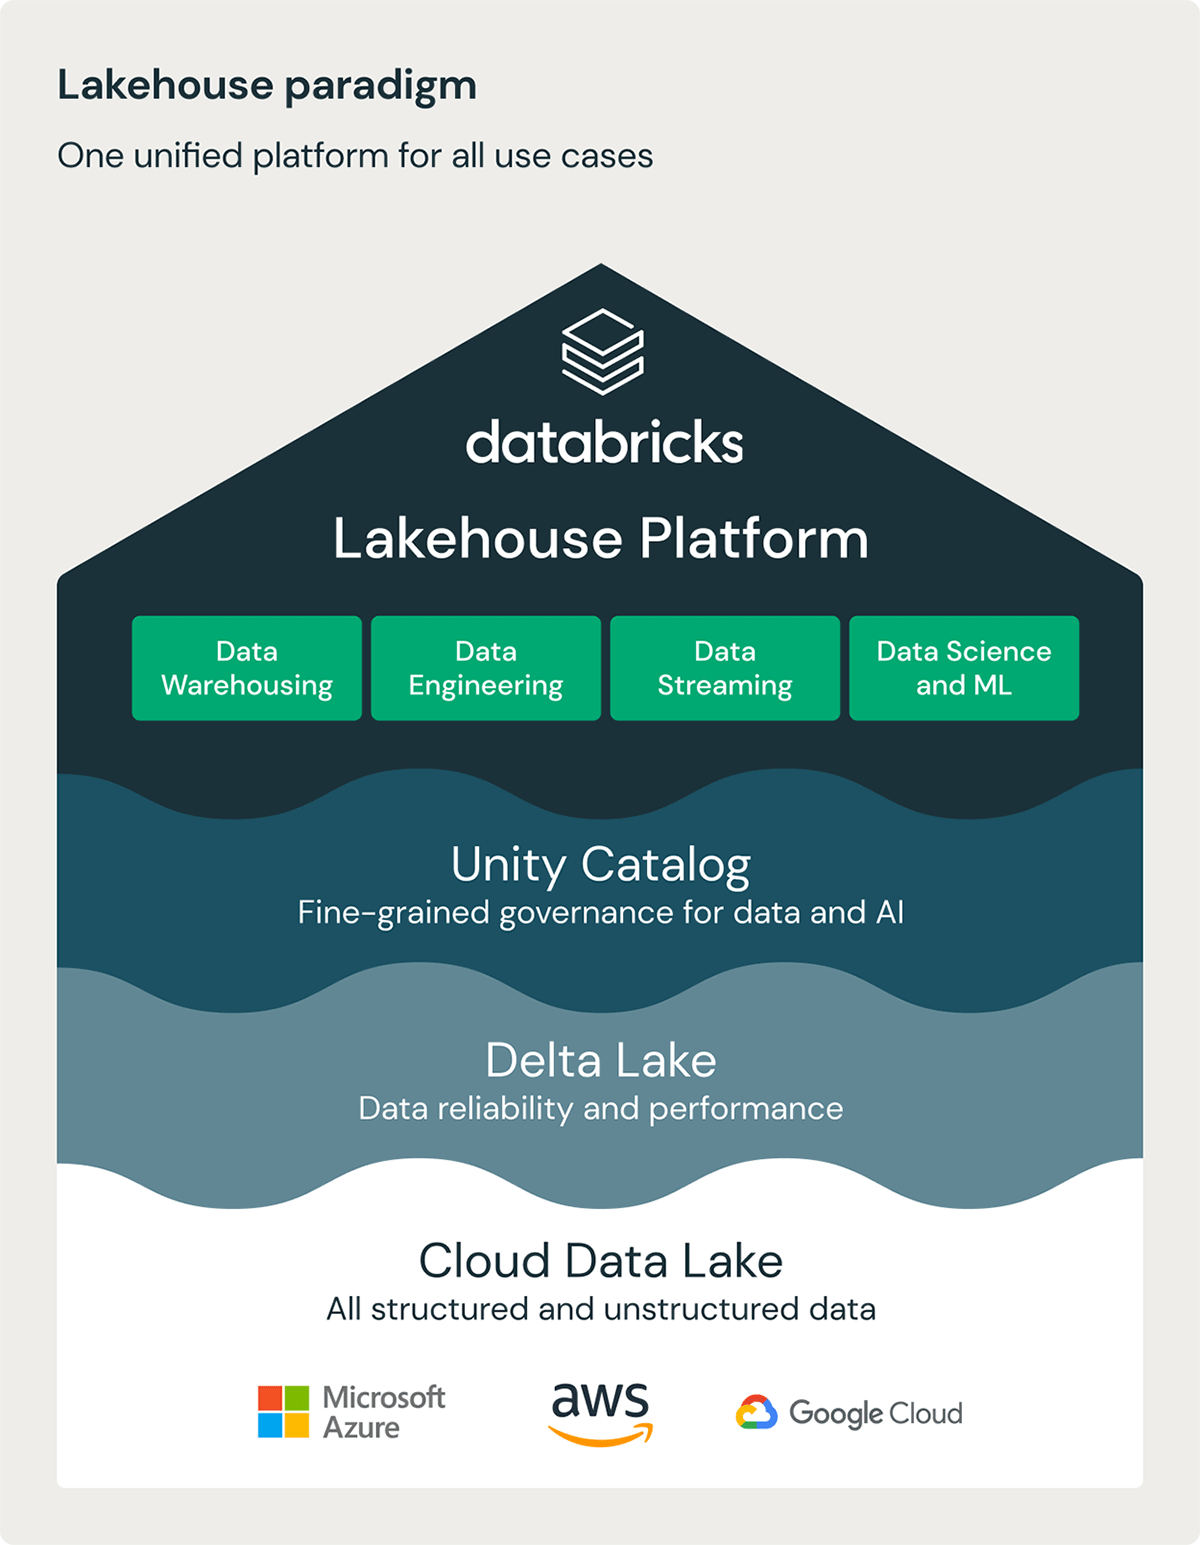 The Lakehouse, a single platform that can support all data types and data workloads.